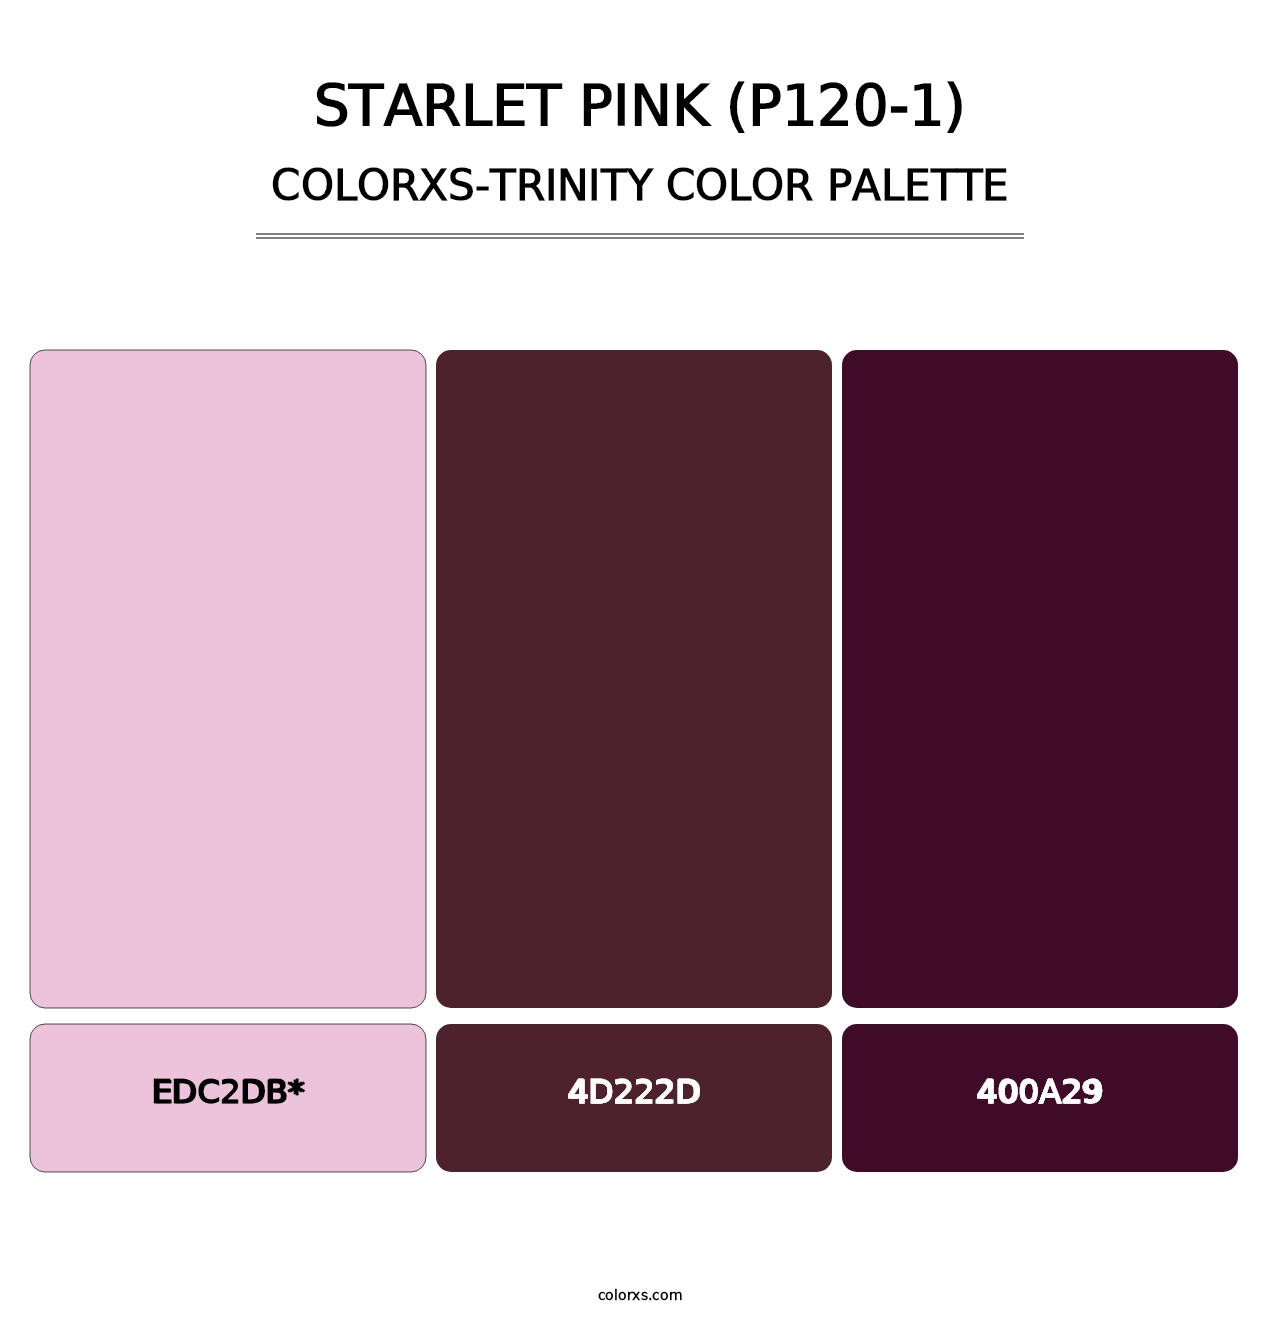 Starlet Pink (P120-1) - Colorxs Trinity Palette